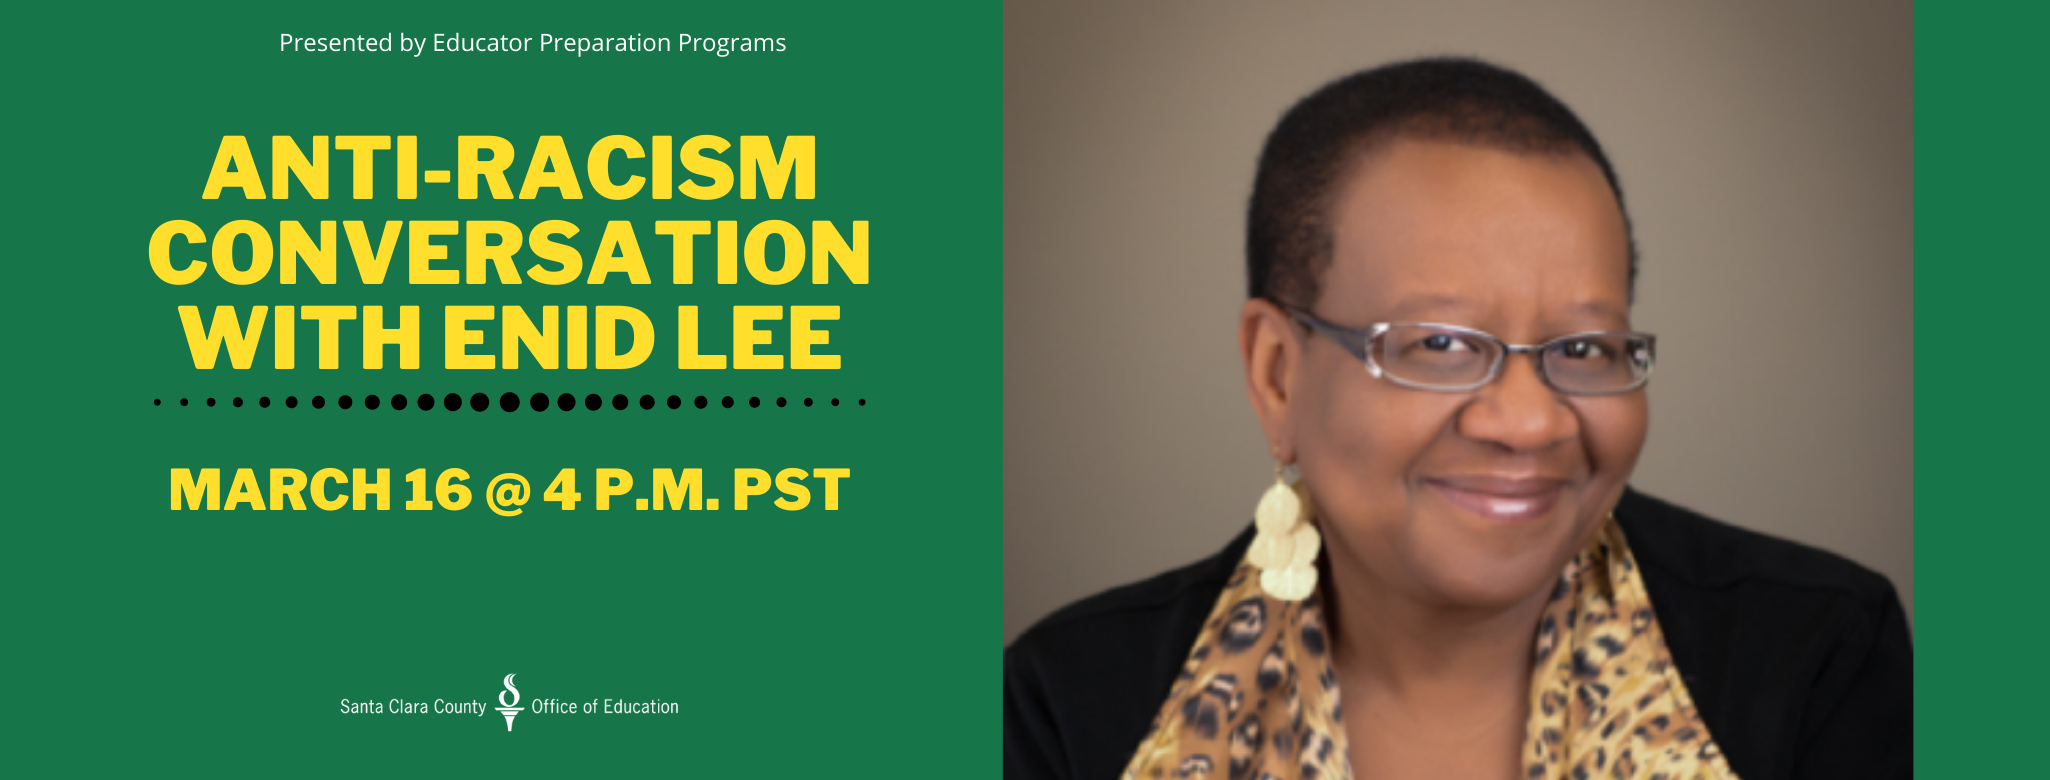 Anti-racism Conversation with Enid Lee